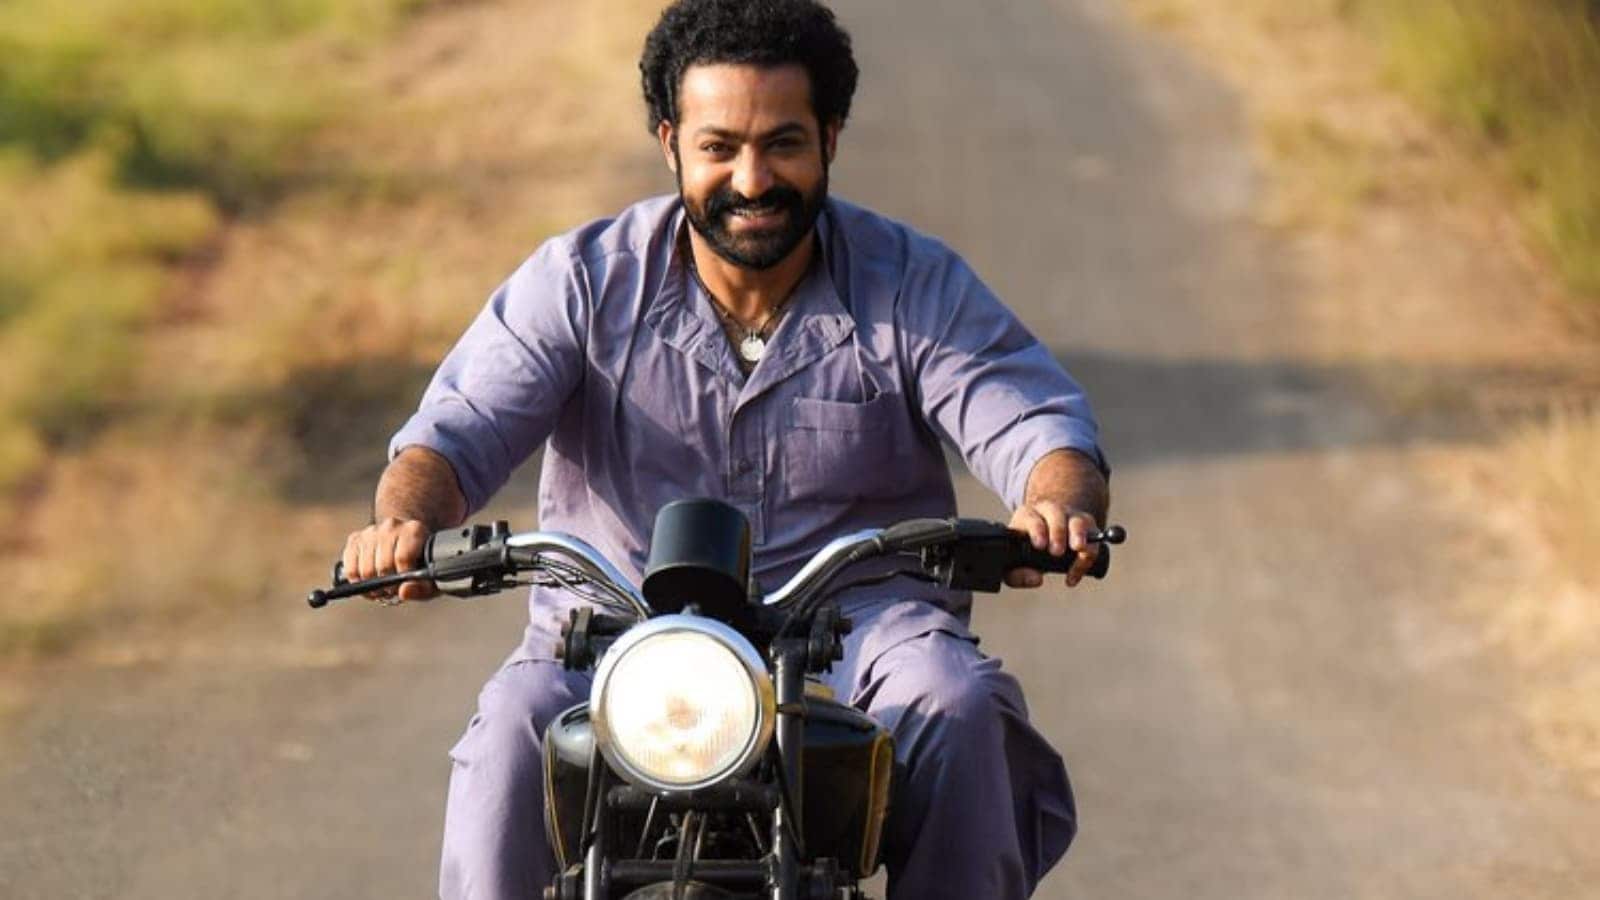 Jr NTR Used This Velocette Bike in SS Rajamouli's RRR. And Yes, They Exited  in 1920s - News18